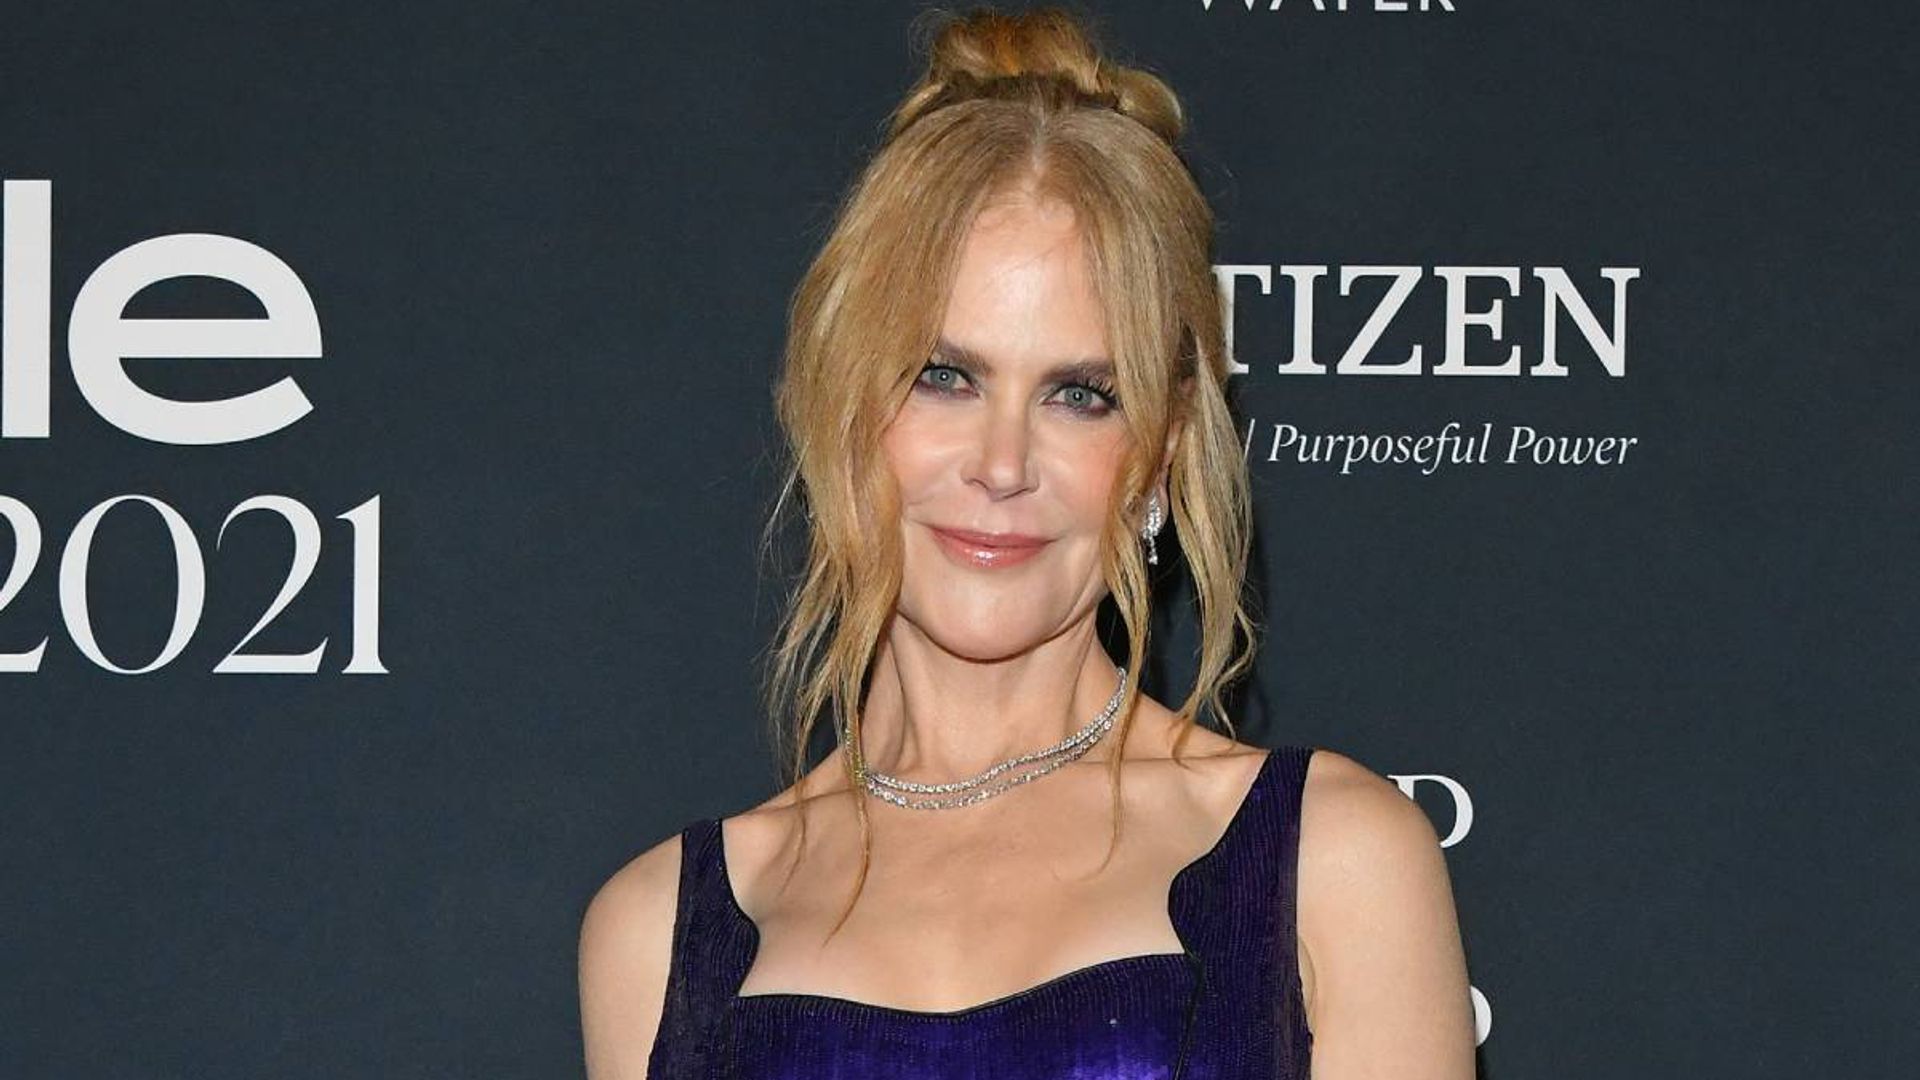 Nicole Kidman wows fans as she dazzles in sheer sequin crop-top